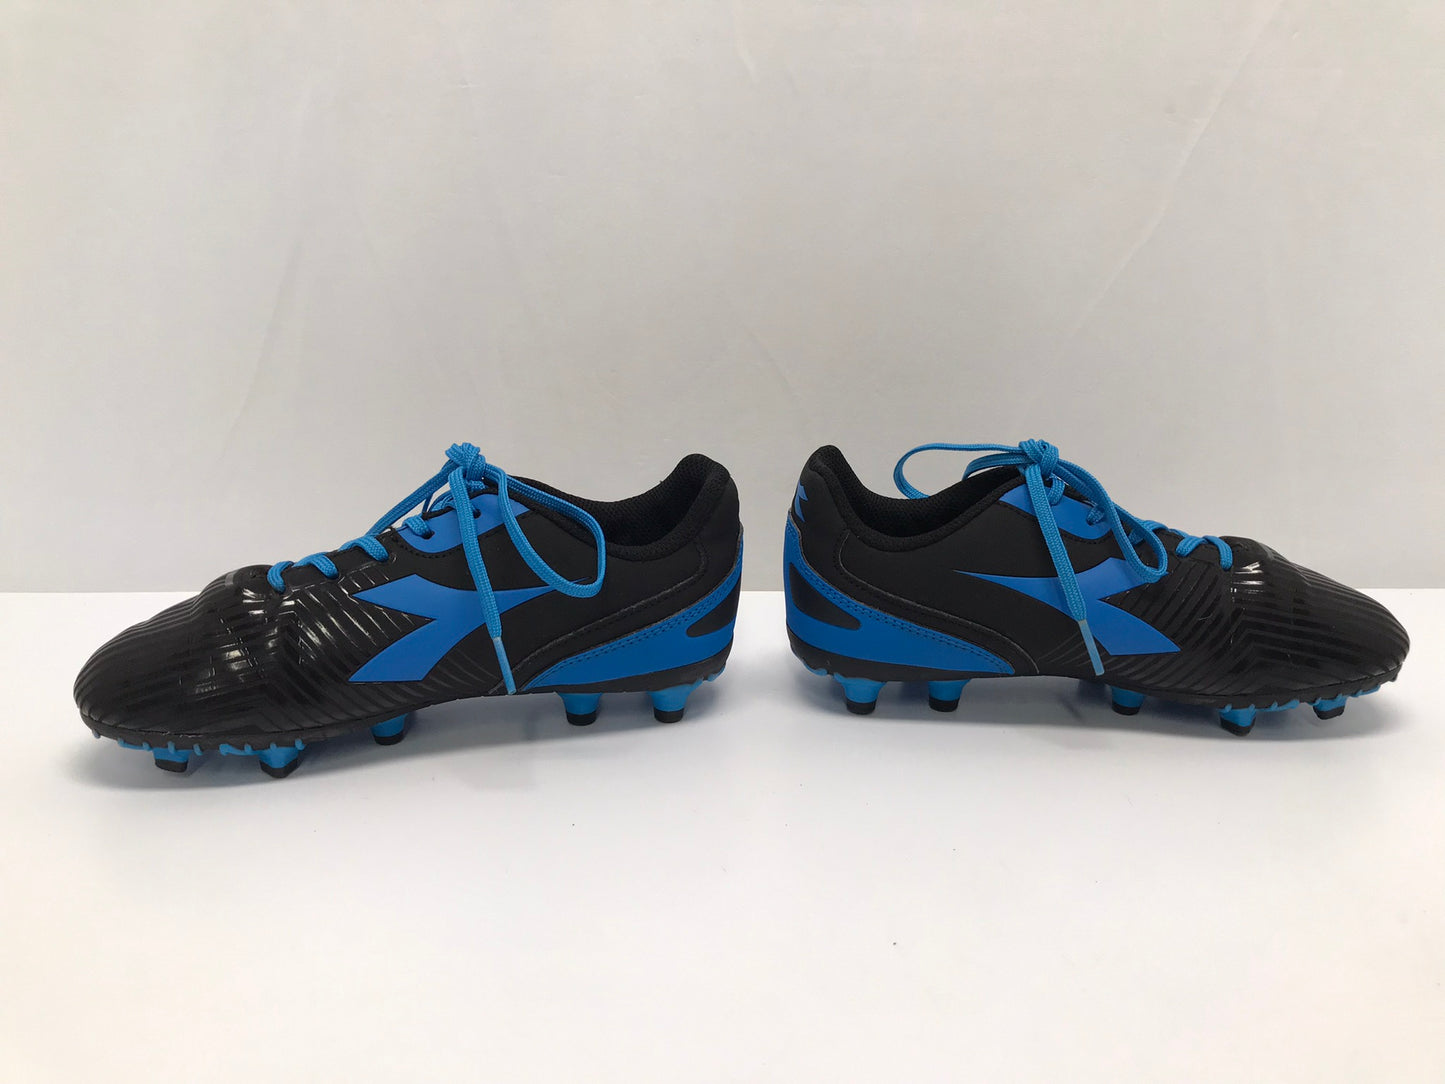 Soccer Shoes Cleats Child Size 1 Adidas Blue Black New Demo Model